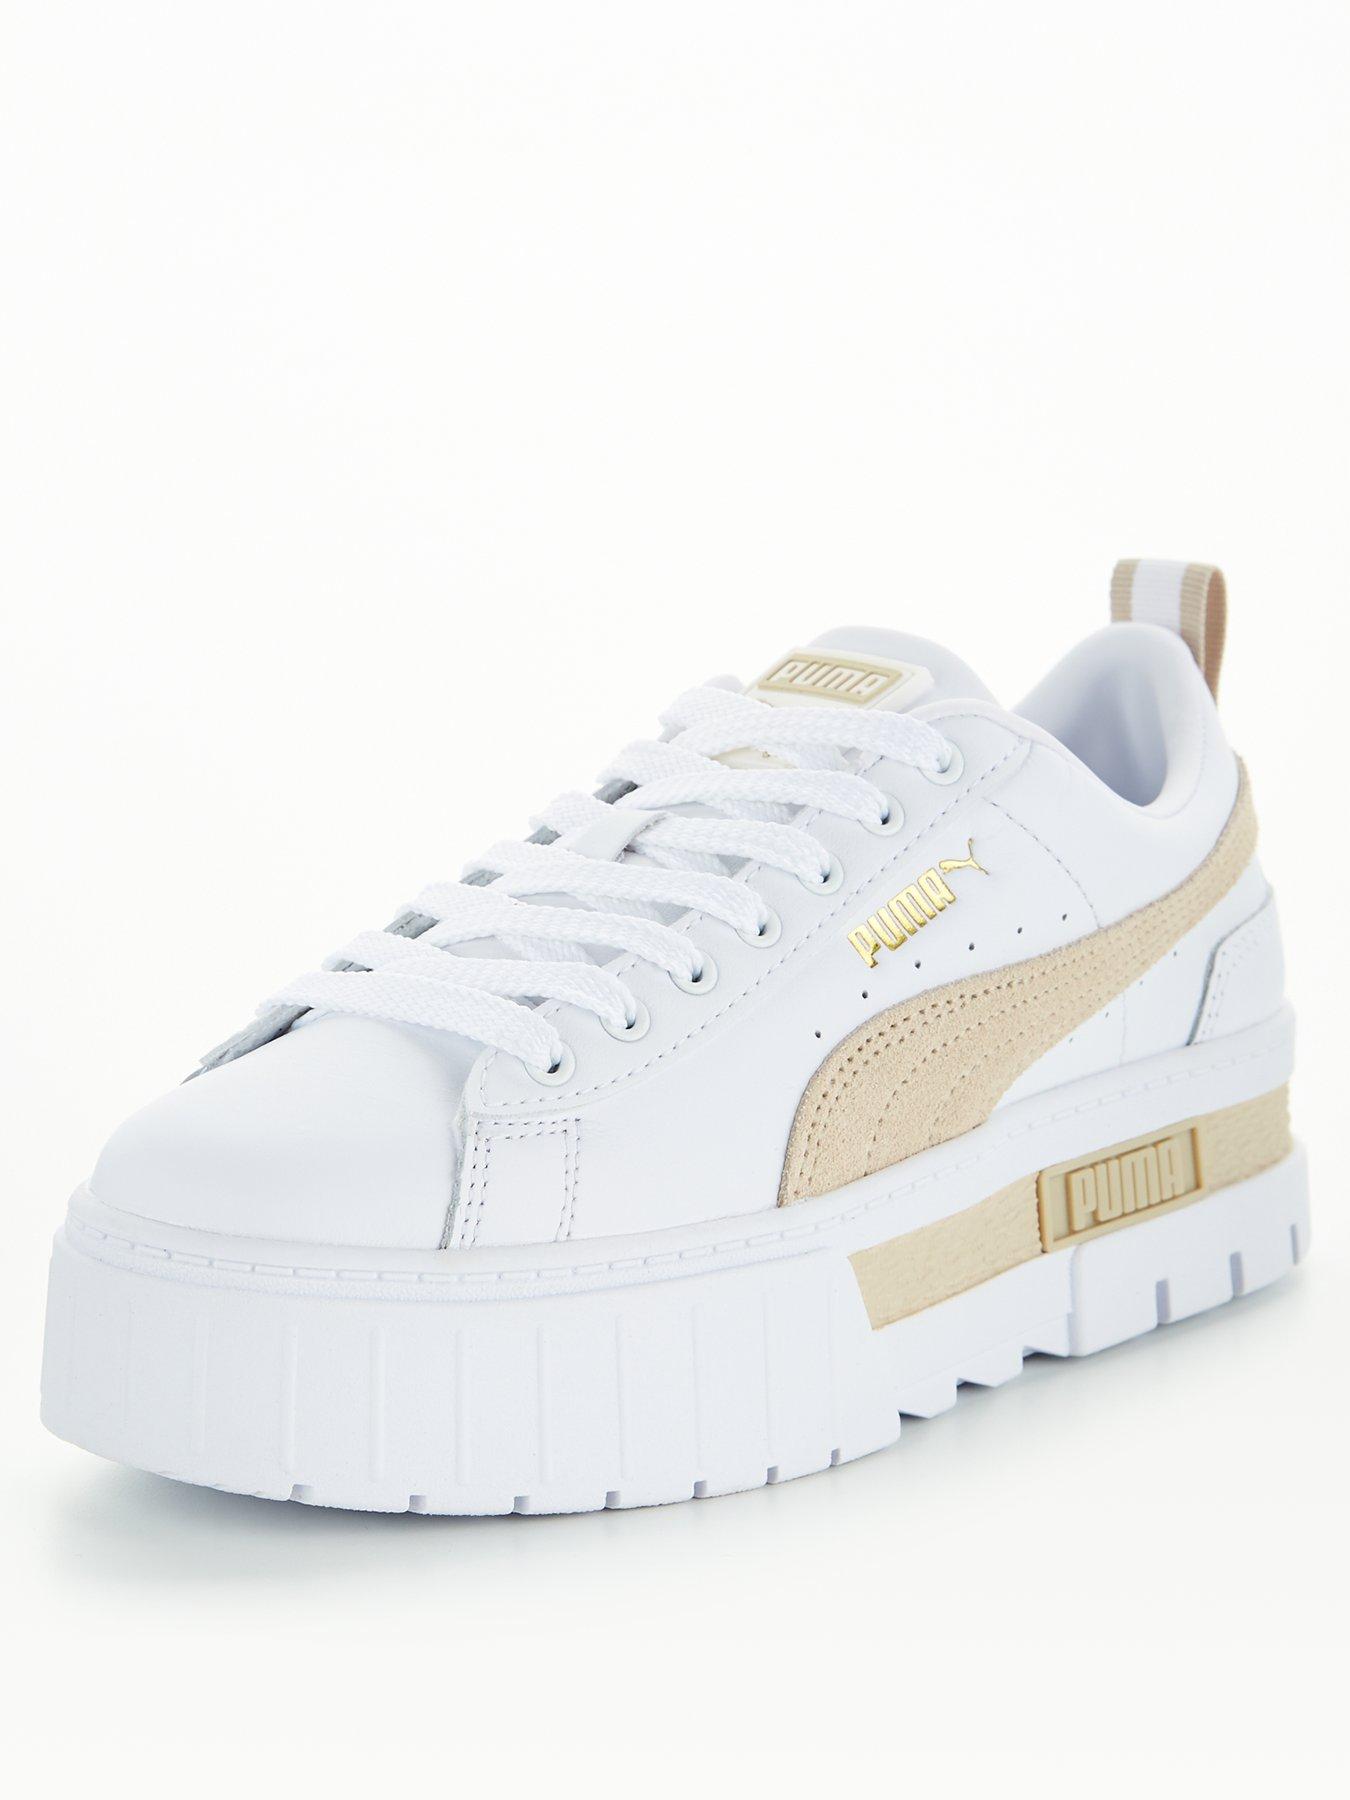 Carnicero blanco lechoso montar Puma Trainers | Puma Women's Trainers at Very.co.uk